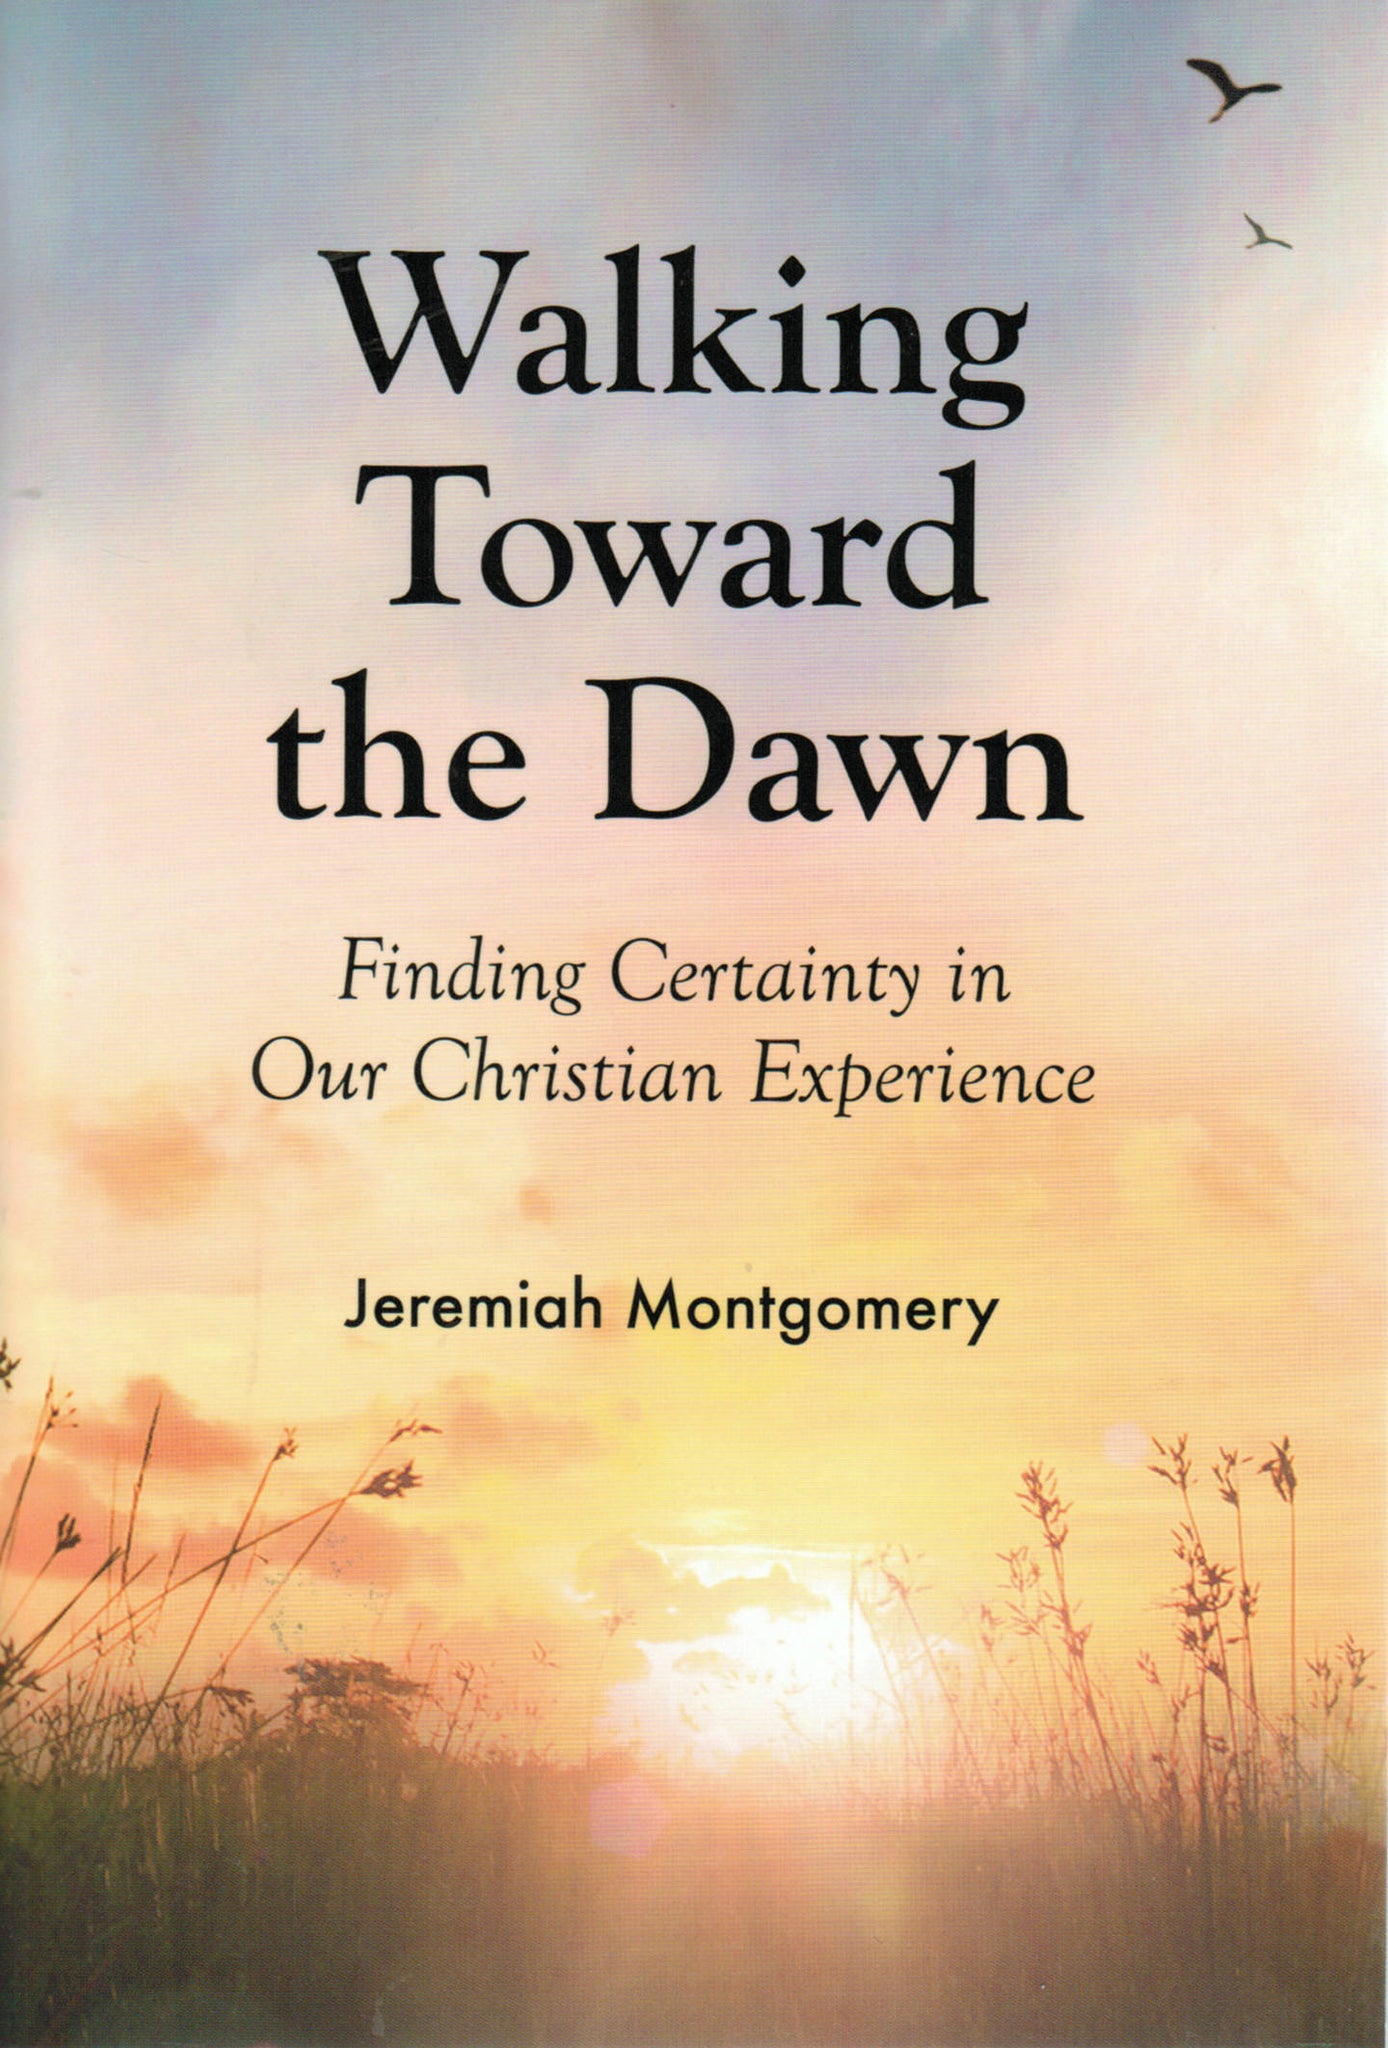 Walking Toward the Dawn: Finding Certainty in Our Christian Experience